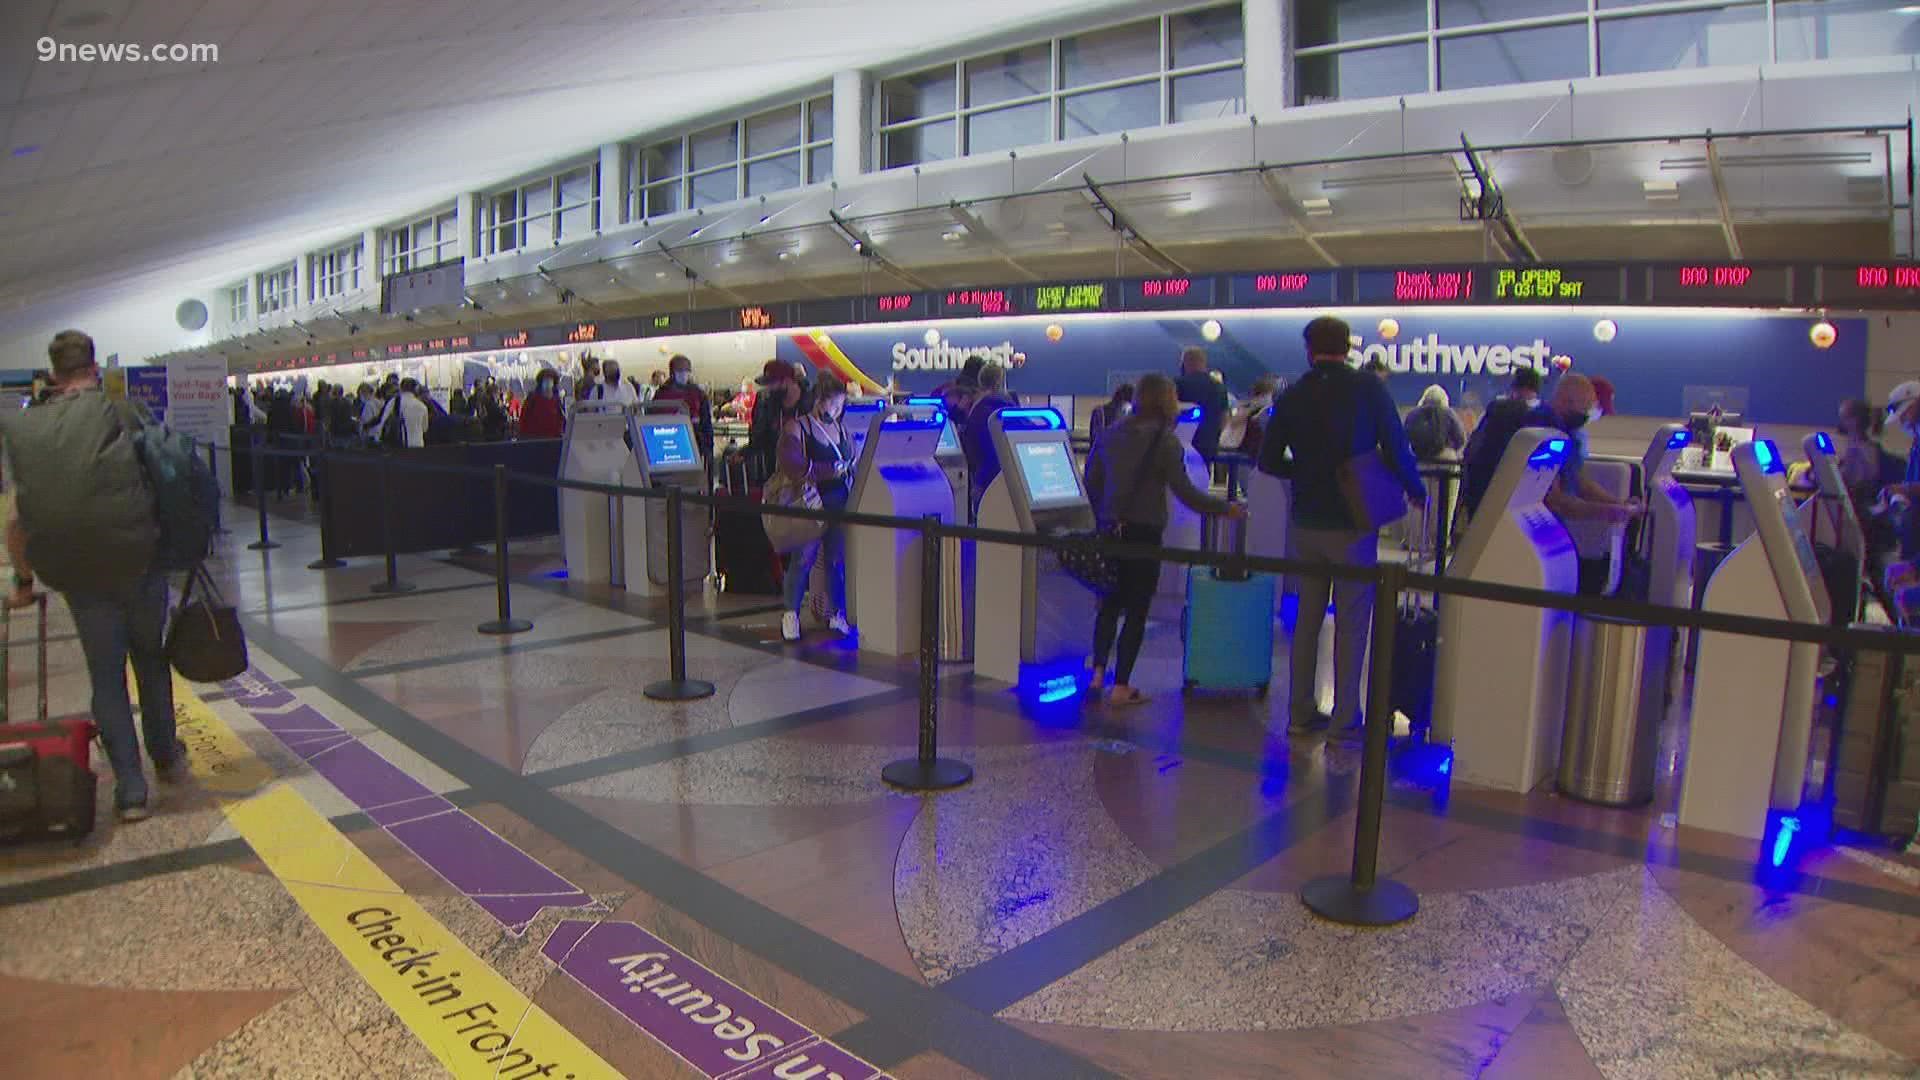 Many customers have received reimbursement for the original flights or a voucher for $200 upon rebooking.